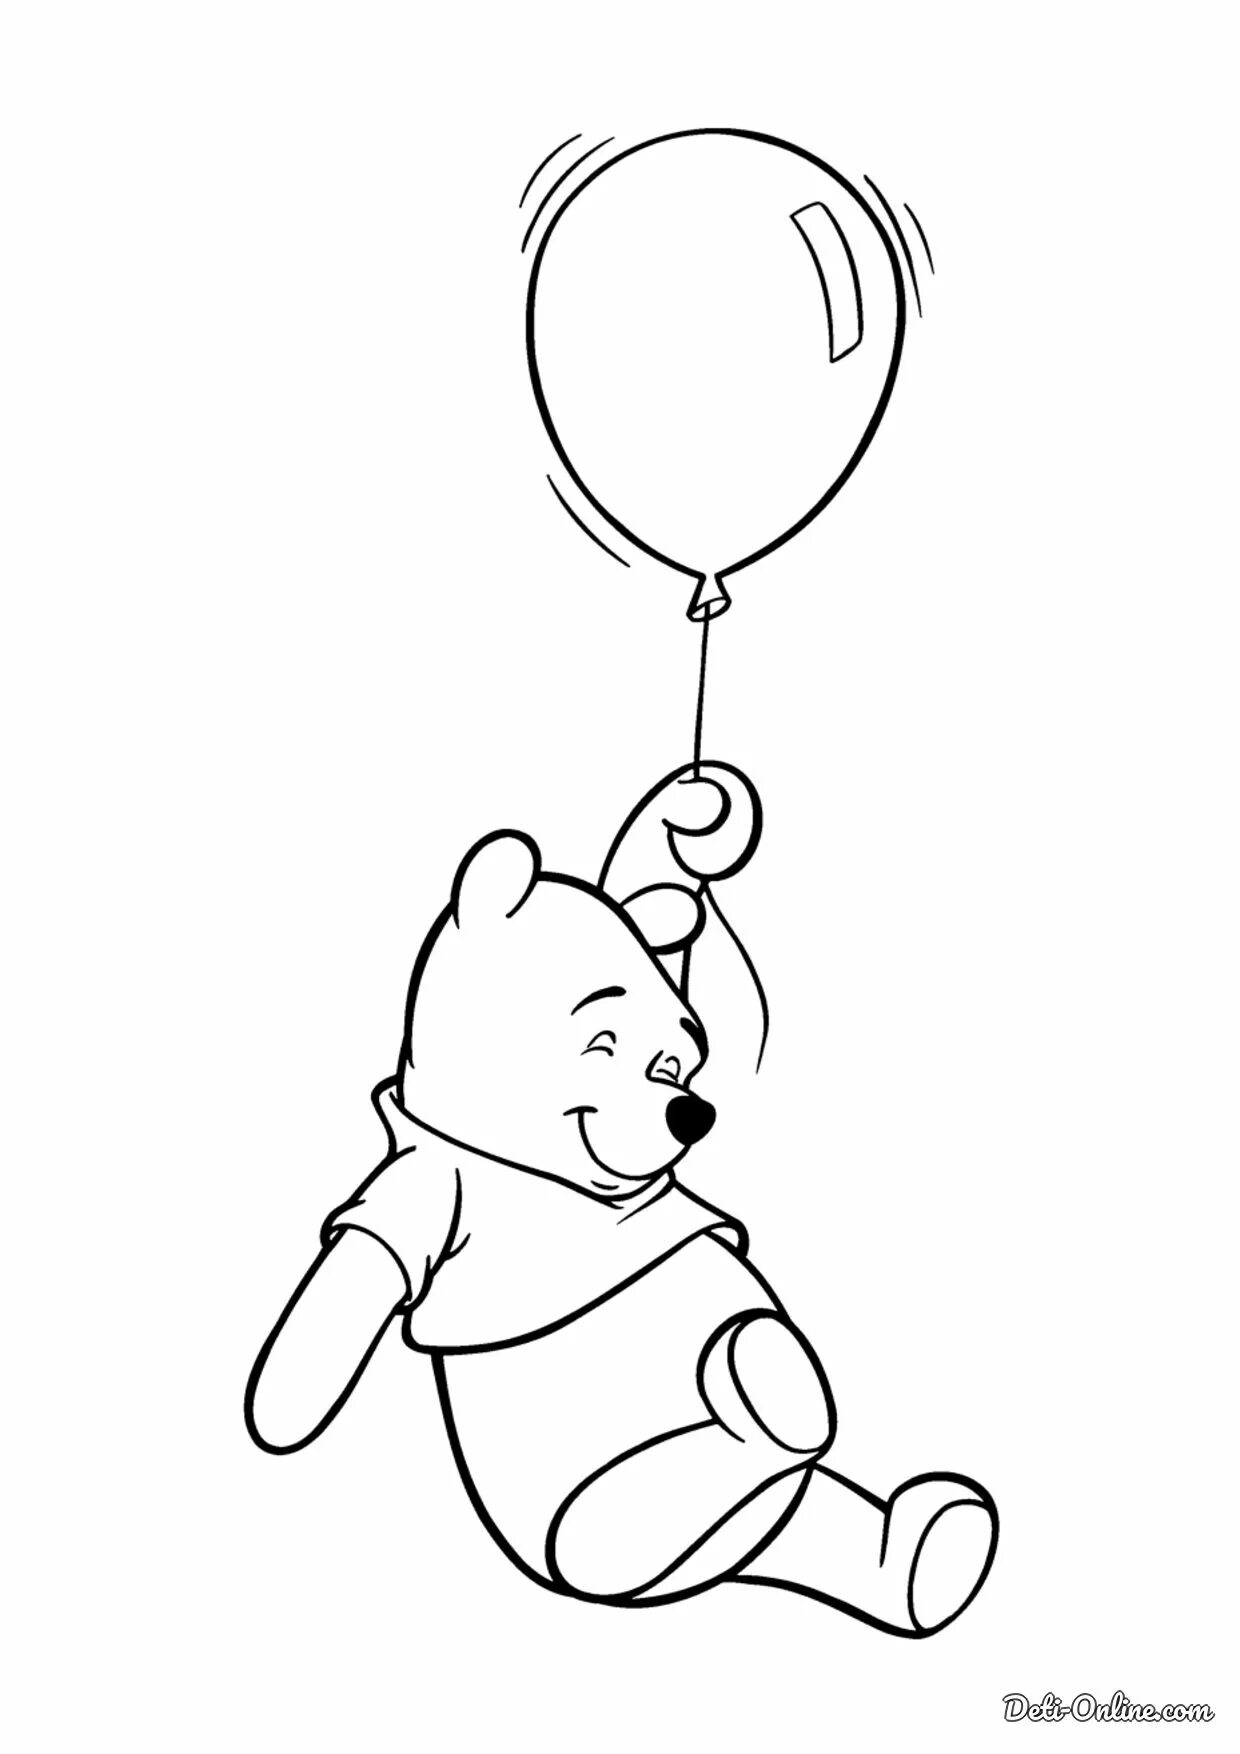 Winnie the pooh with balloon #15